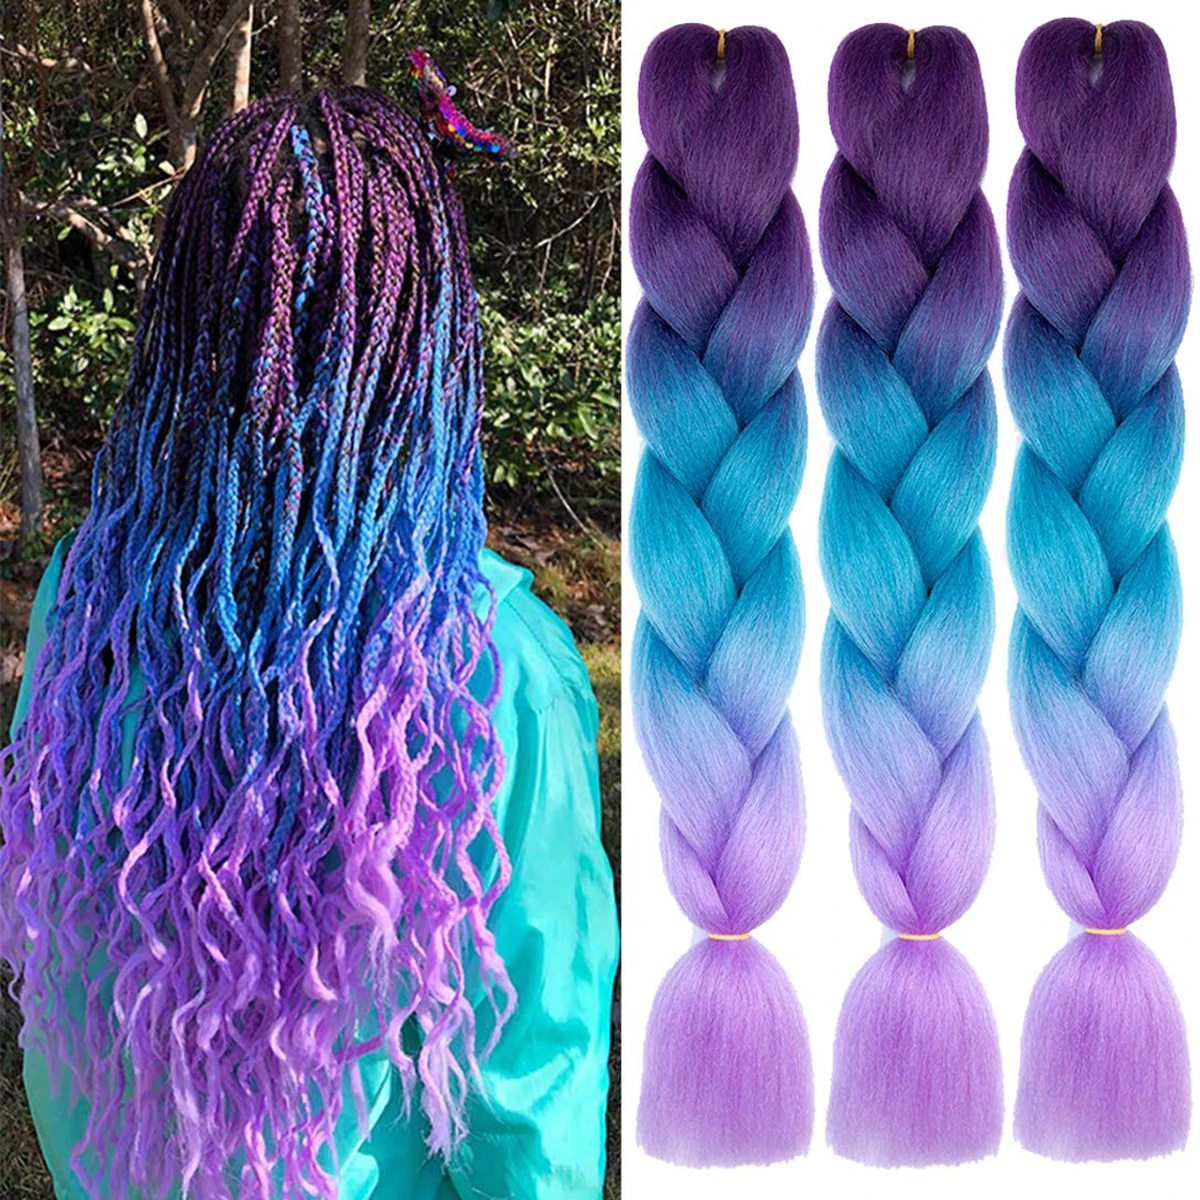 Ombre Braiding Hair 24 Inch 1PCS/3pcs/Pack High-temperature Synthetic Crochet Twist Rainbow Hair Gray Black Trend Way for Women 3pcs 1pcs for creality k1 k1 max nozzle brass high speed 3d printer nozzles 0 4 0 6 0 8mm fit 1 75mm filament for k1max cr m4